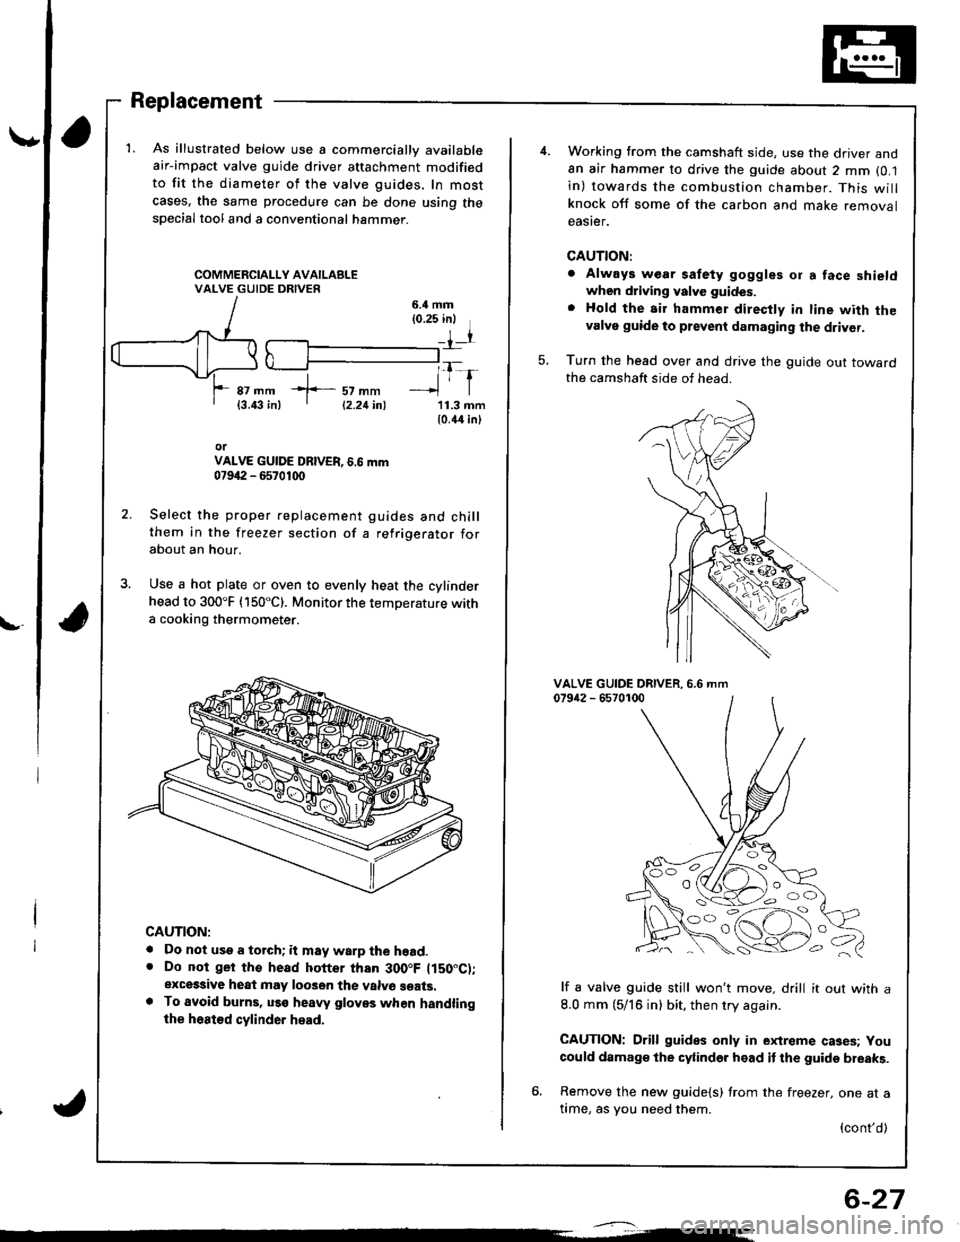 HONDA INTEGRA 1998 4.G Workshop Manual \,
Replacement
1. As illustrated below use a commercially available
air-impact valve guide driver attachment modified
to fit the diameter of the valve guides, In most
cases, the same procedure can be 